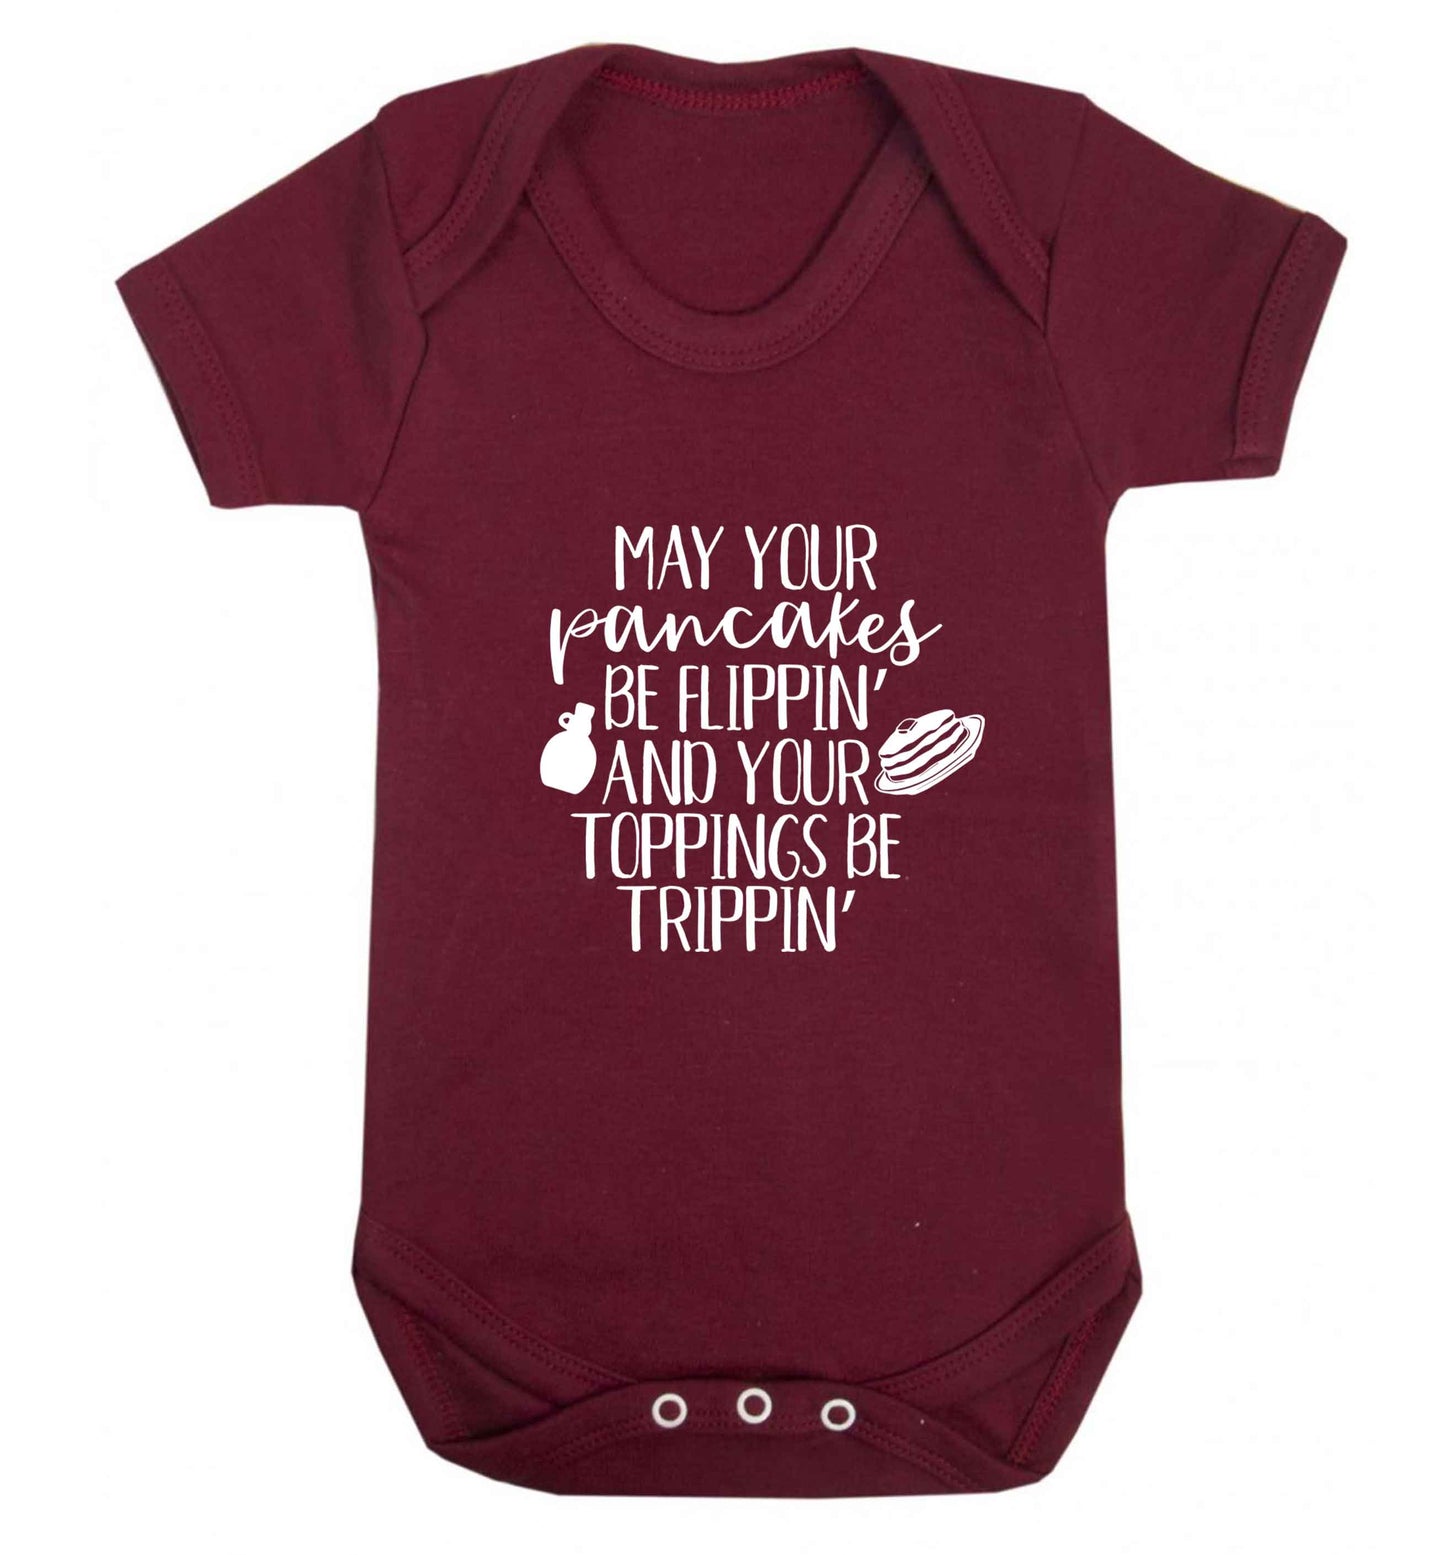 May your pancakes be flippin' and your toppings be trippin' baby vest maroon 18-24 months